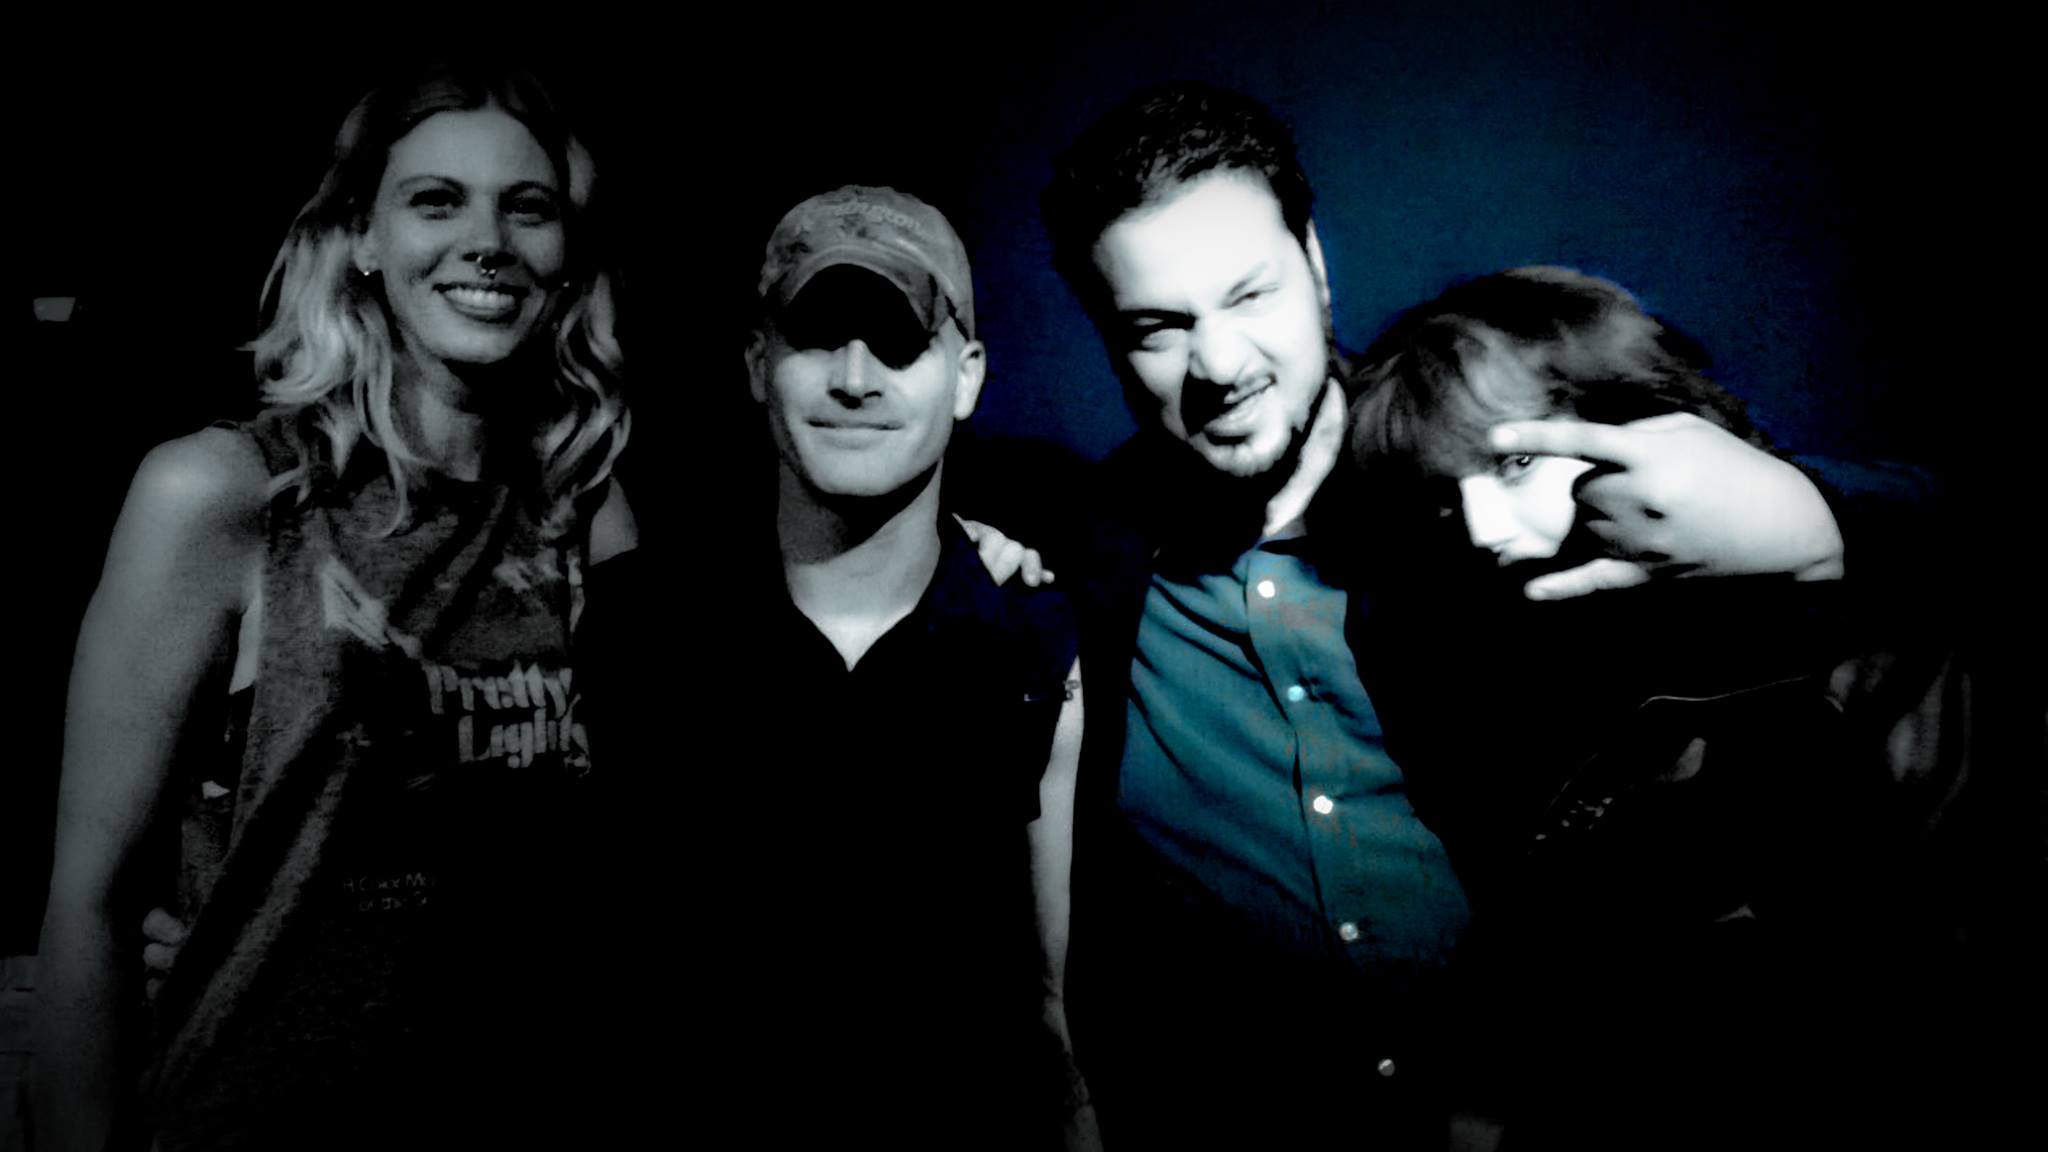 with actress Sarah-Joy Elizabeth, musician Michale Graves, and actress Red Statyk.